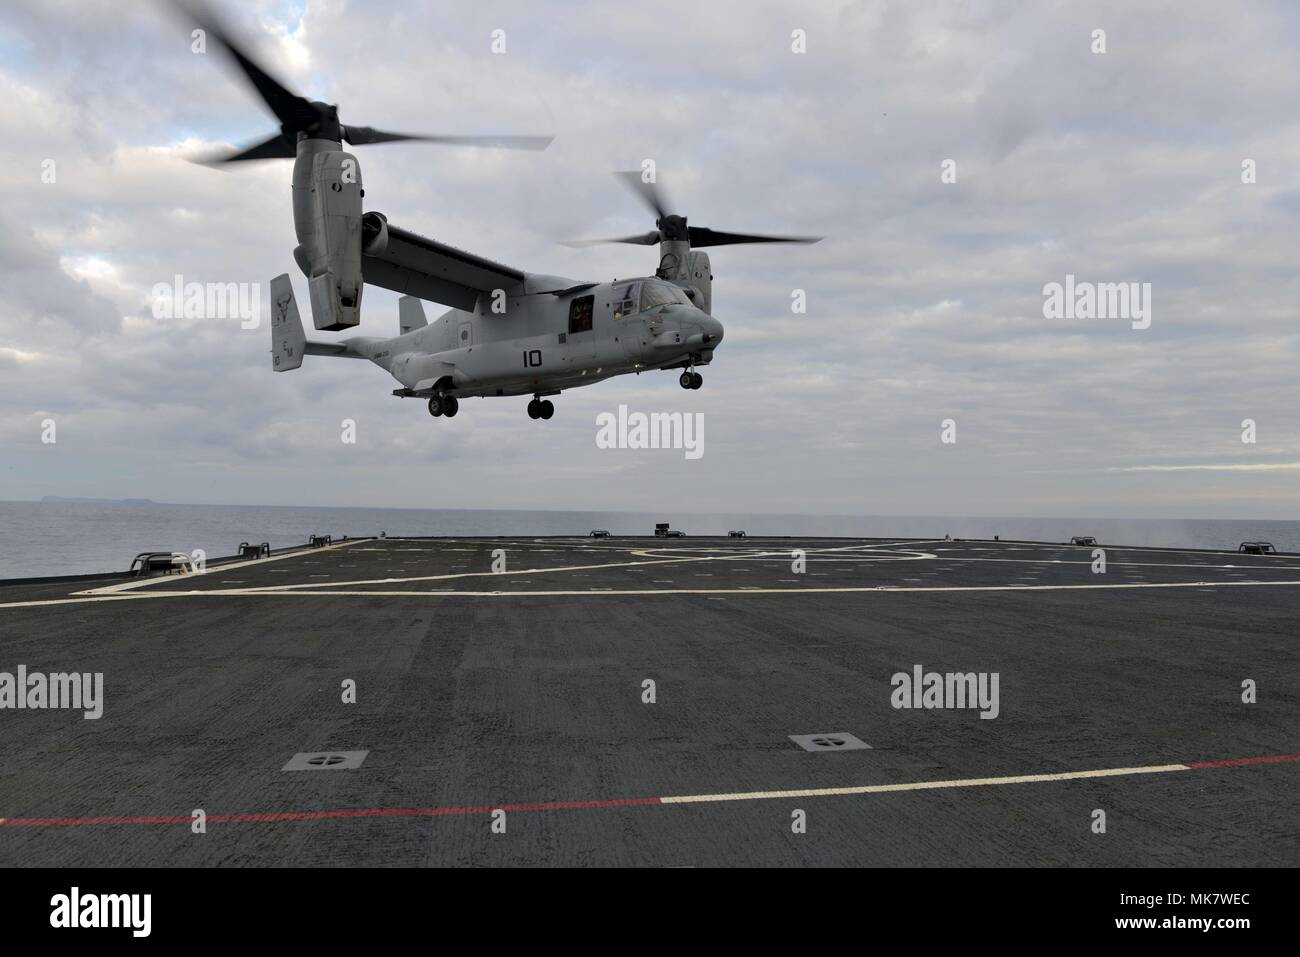 171121-N-GL340-023 MEDITERRANEAN SEA (Nov. 21, 2017) An MV-22 Osprey, attached tpt Marine Medium Tiltrotor Squadron (VMM) 261, lands on the flight deck of the Blue Ridge-class command and control ship USS Mount Whitney (LCC 20) off the coast of Naples, Italy, Nov. 21, 2017. Mount Whitney, forward-deployed to Gaeta, Italy, operates with a combined crew of U.S. Navy Sailors and Military Sealift Command civil service mariners. (U.S. Navy photo by Mass Communication Specialist 2nd Class Michael Feddersen/Released) Stock Photo